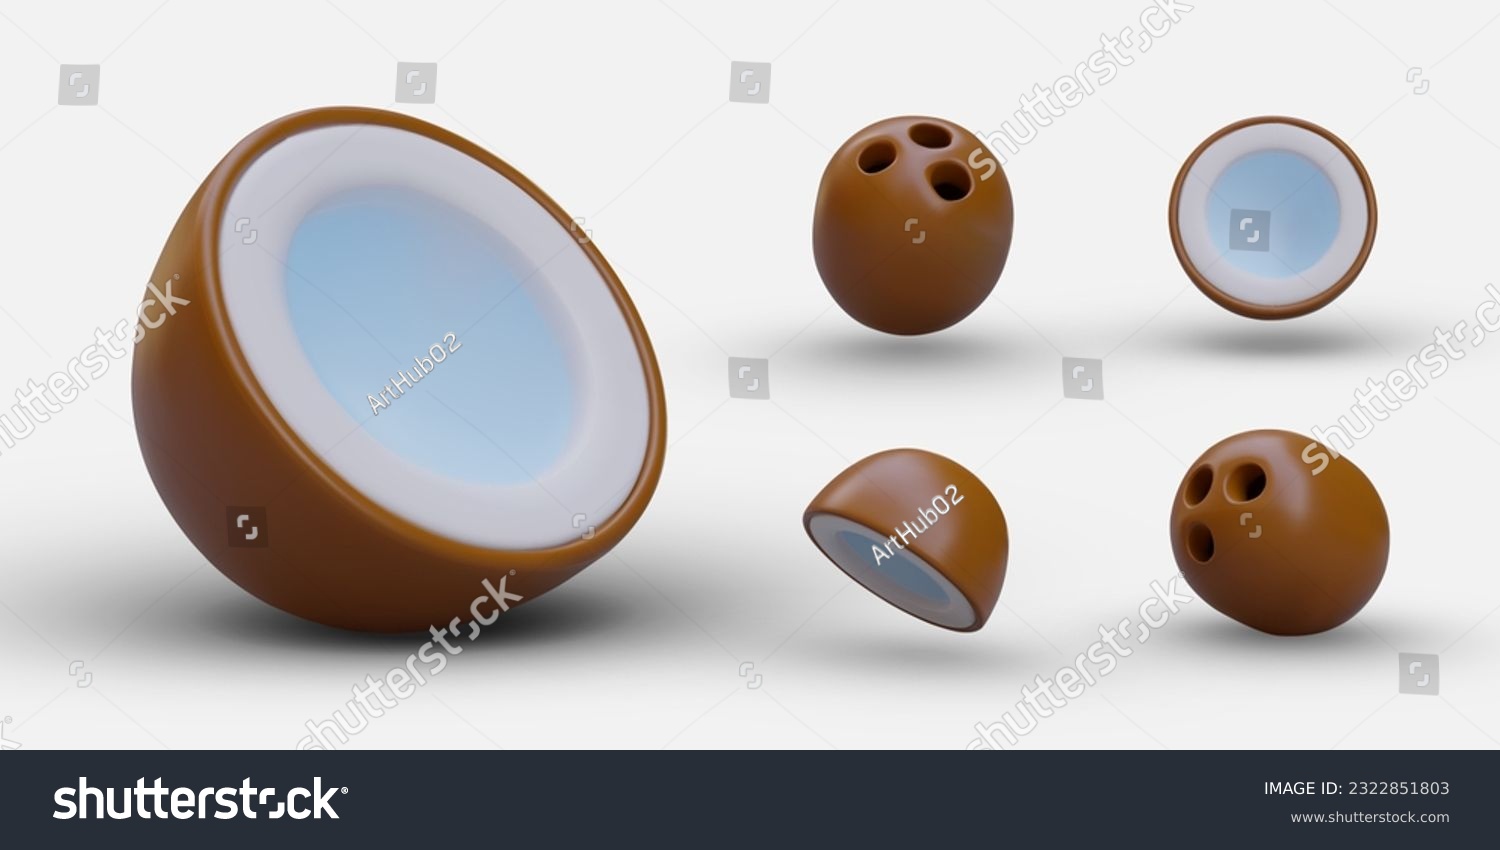 SVG of Set of 3D coconuts in cartoon style. Whole and half ripe coconuts. Brown tropical nuts, white center. Isolated vector images for cooking sites, apps with diet recipes svg